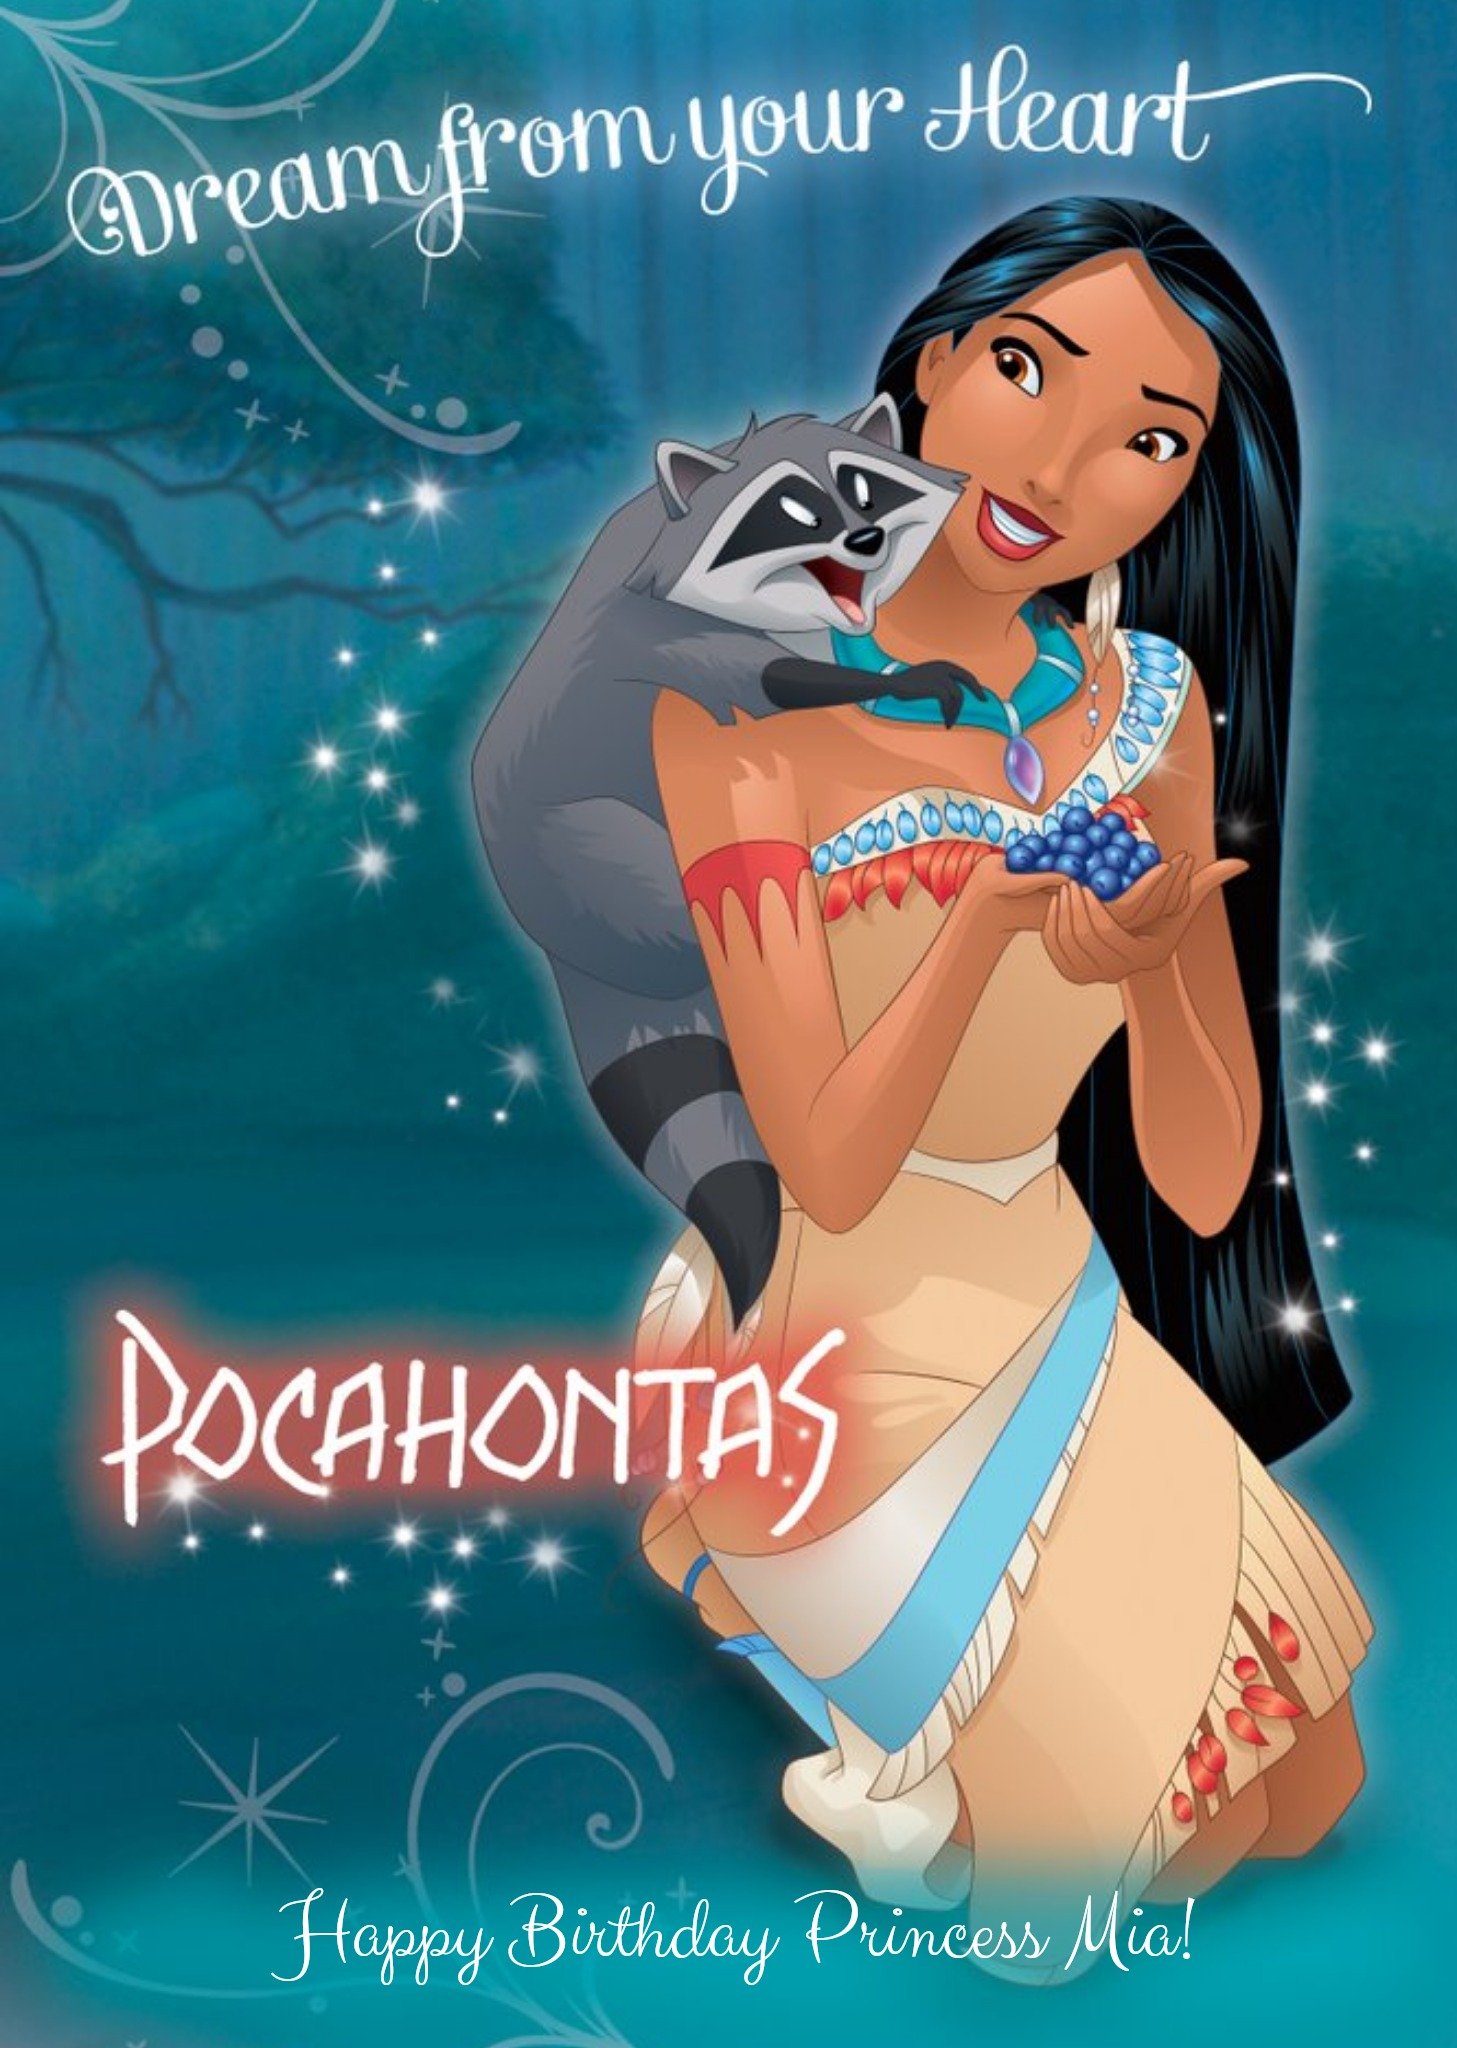 Disney Pocahontas Dream From Your Heart Personalised Happy Birthday Card Ecard